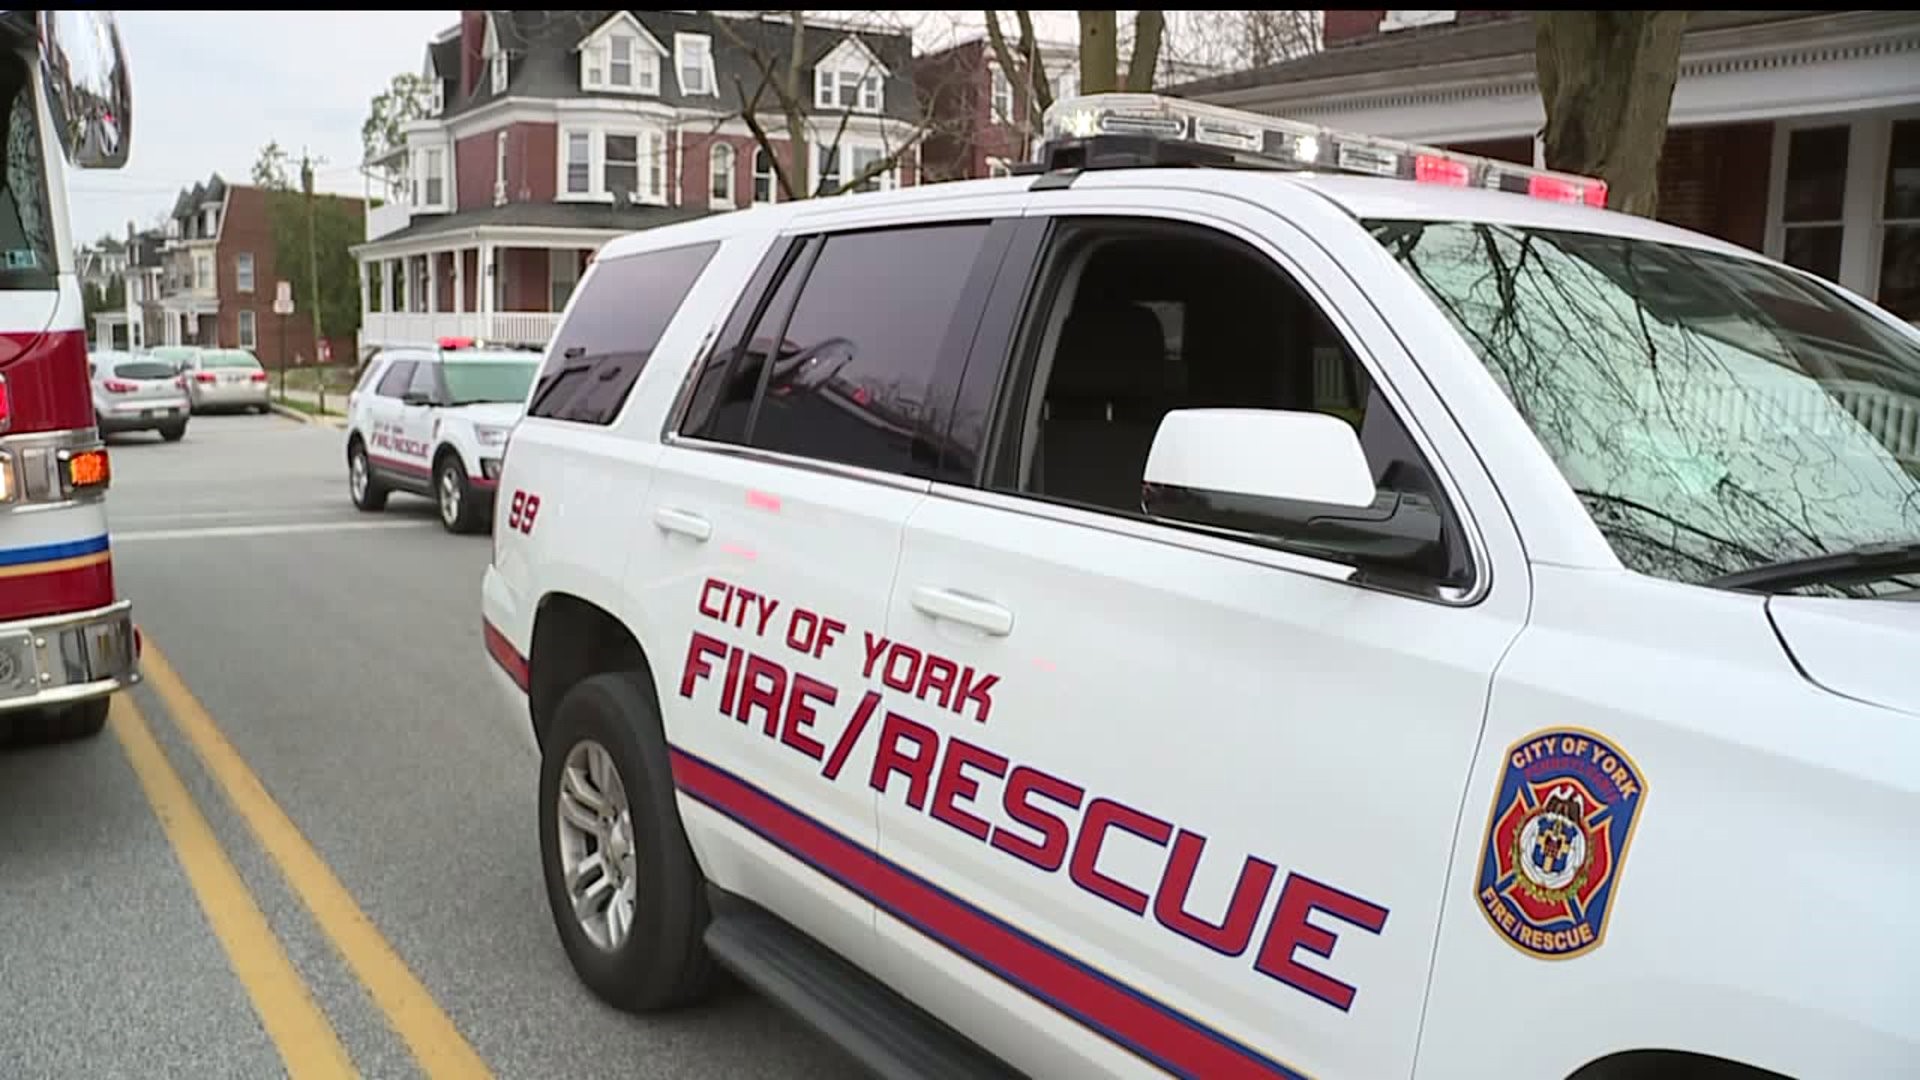 Firefighters in York see uptick in drug overdoses